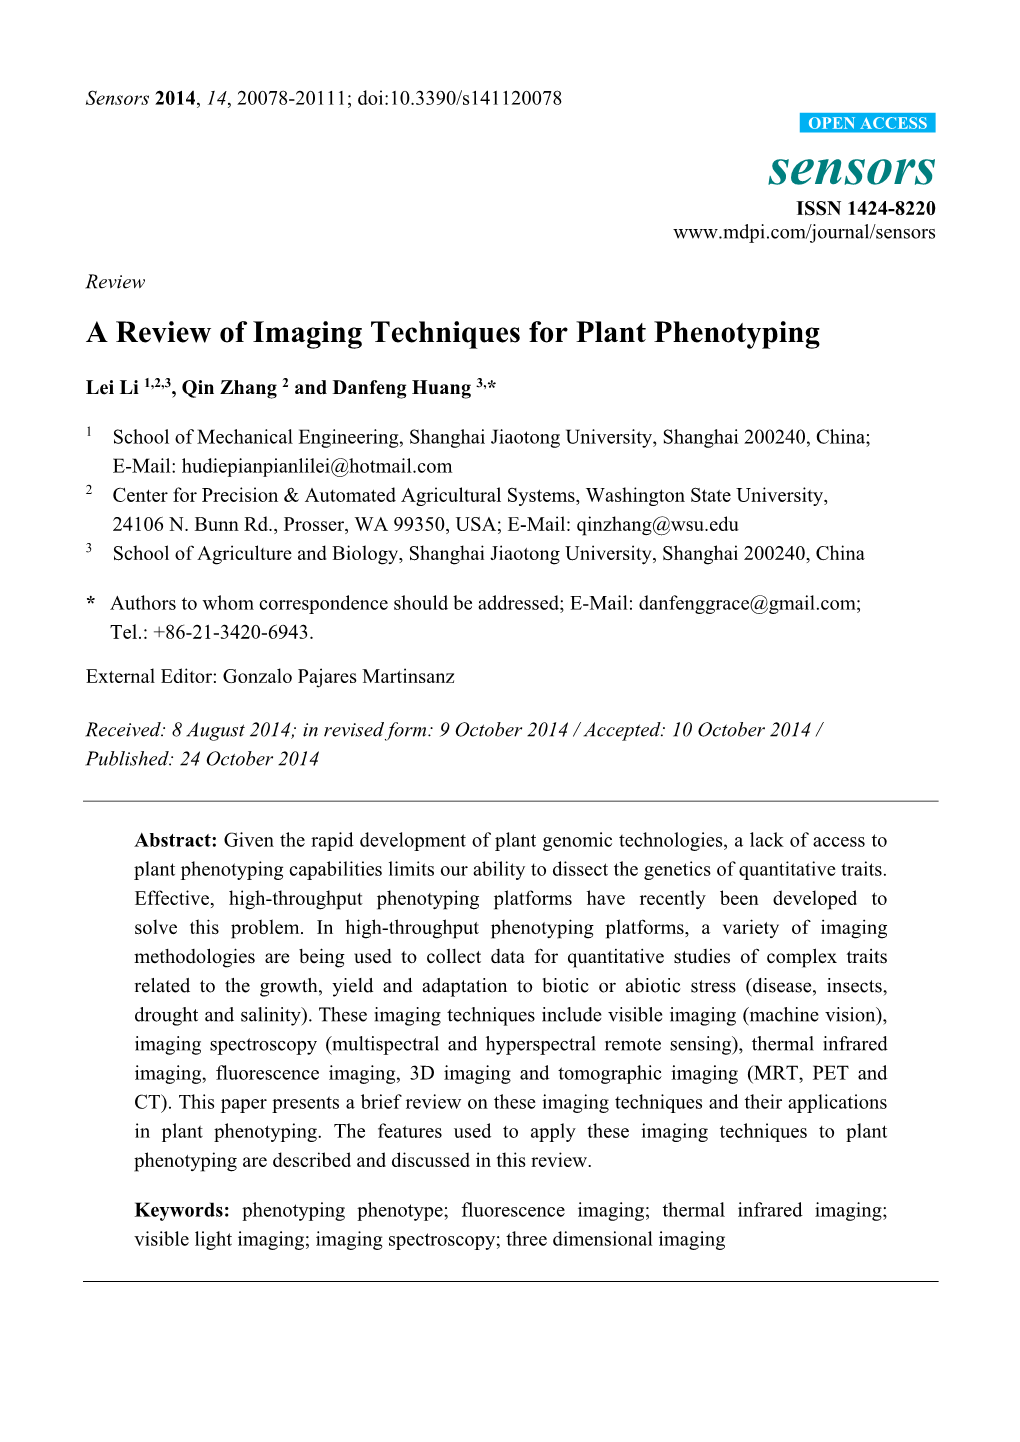 A Review of Imaging Techniques for Plant Phenotyping